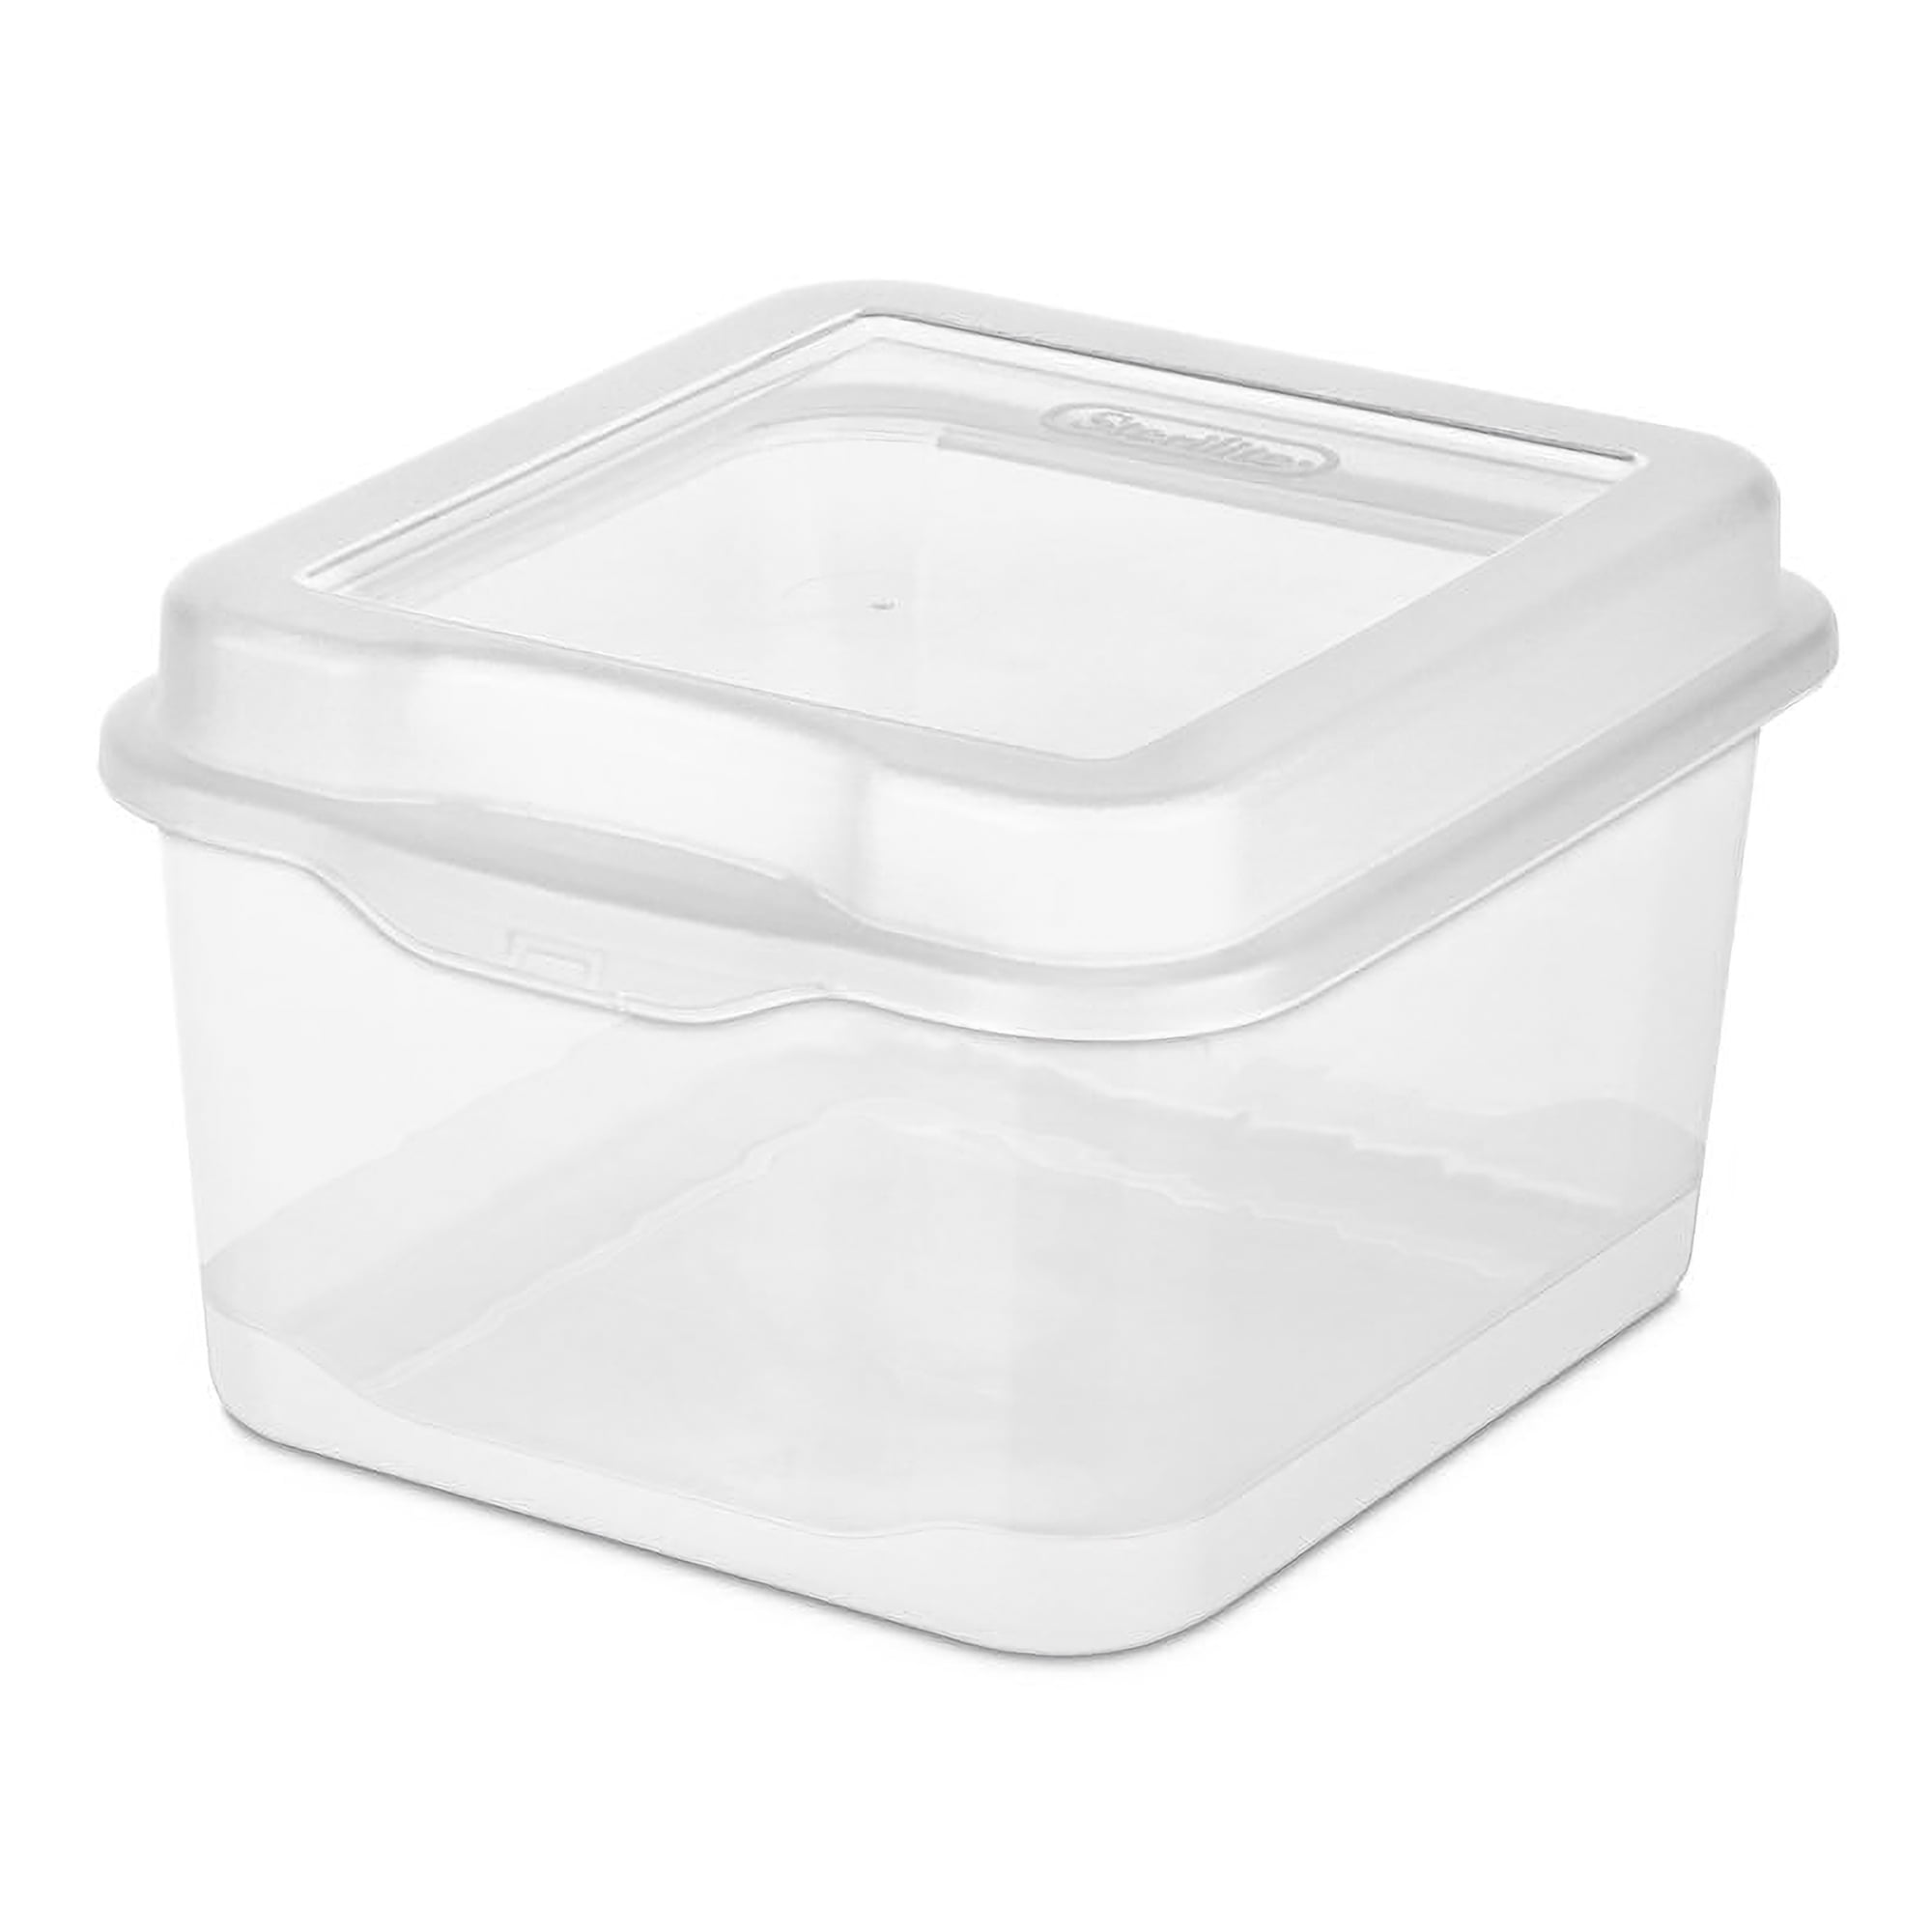 Totes with lids, flip top storage tote, plastic storage totes with lids